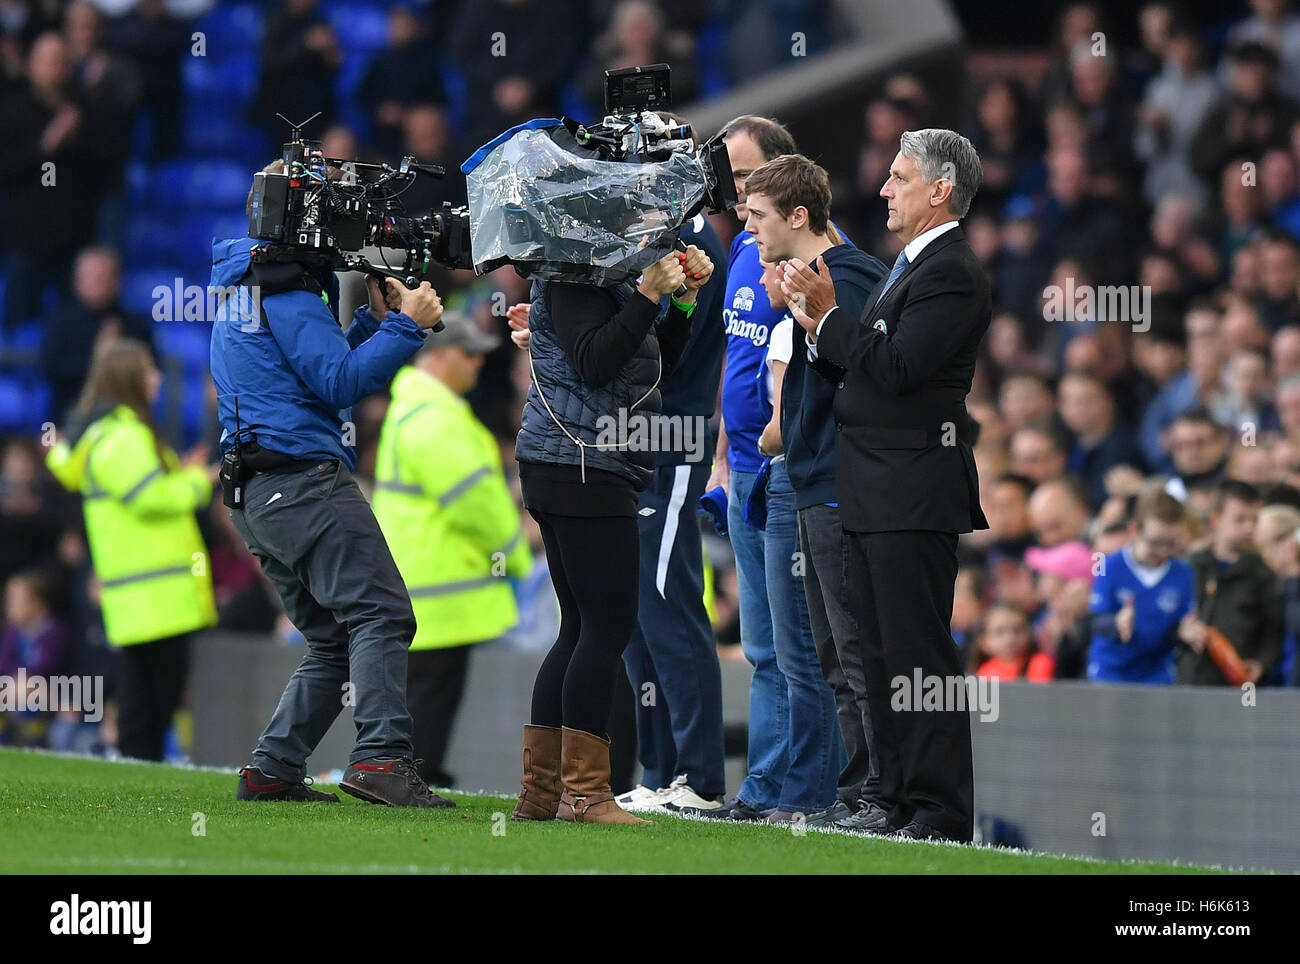 Actors filming a recreation of the moment when the parents and brother of Evertonian Rhys Jones were applauded by the Goodison Park crowd Stock Photo